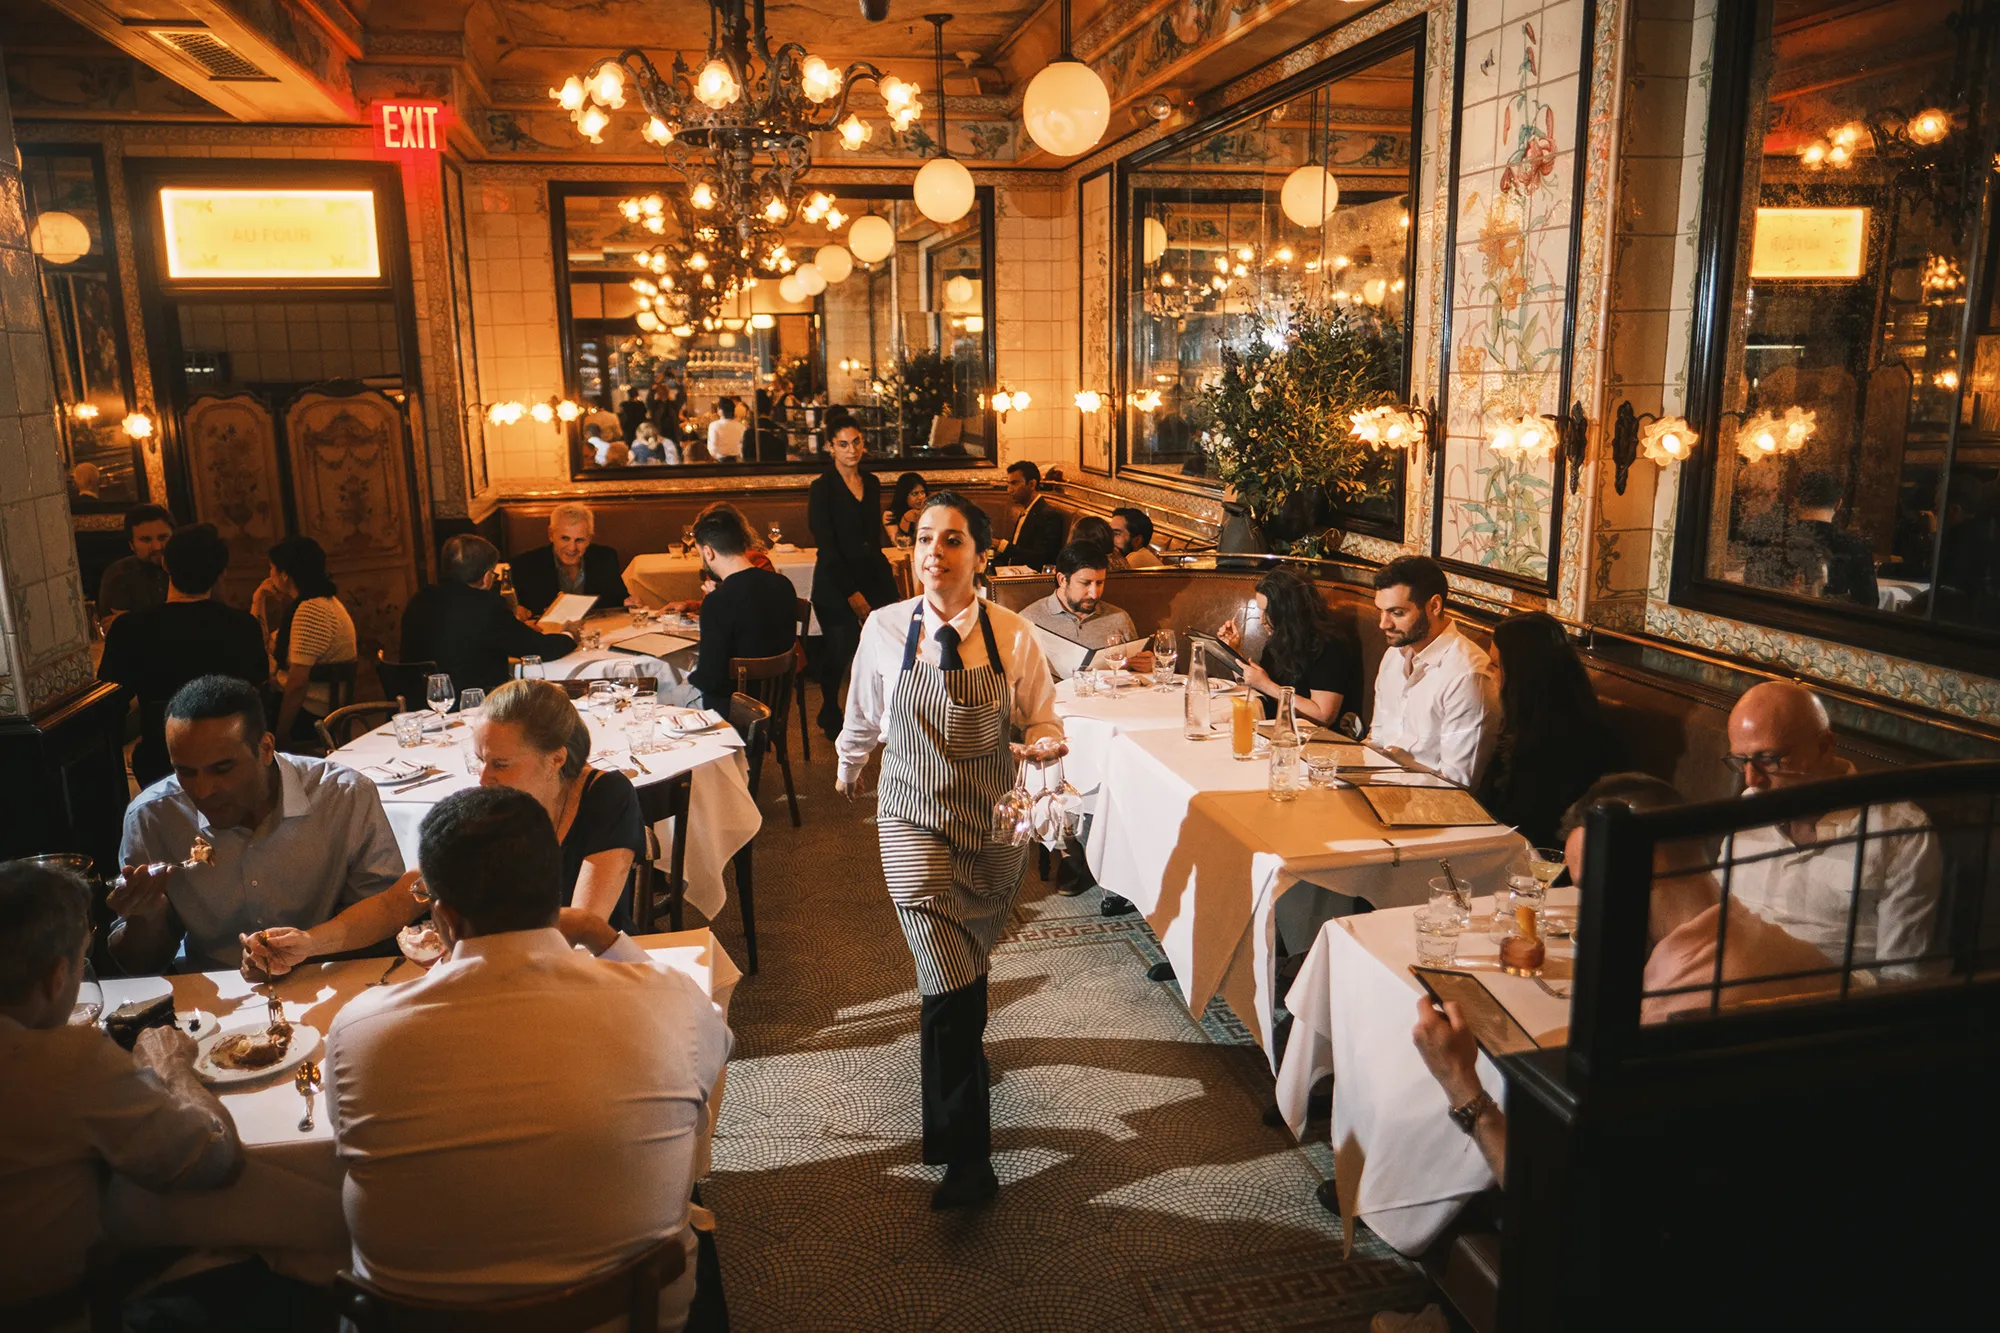 New study confirms what we know: New York has the best restaurants in the world